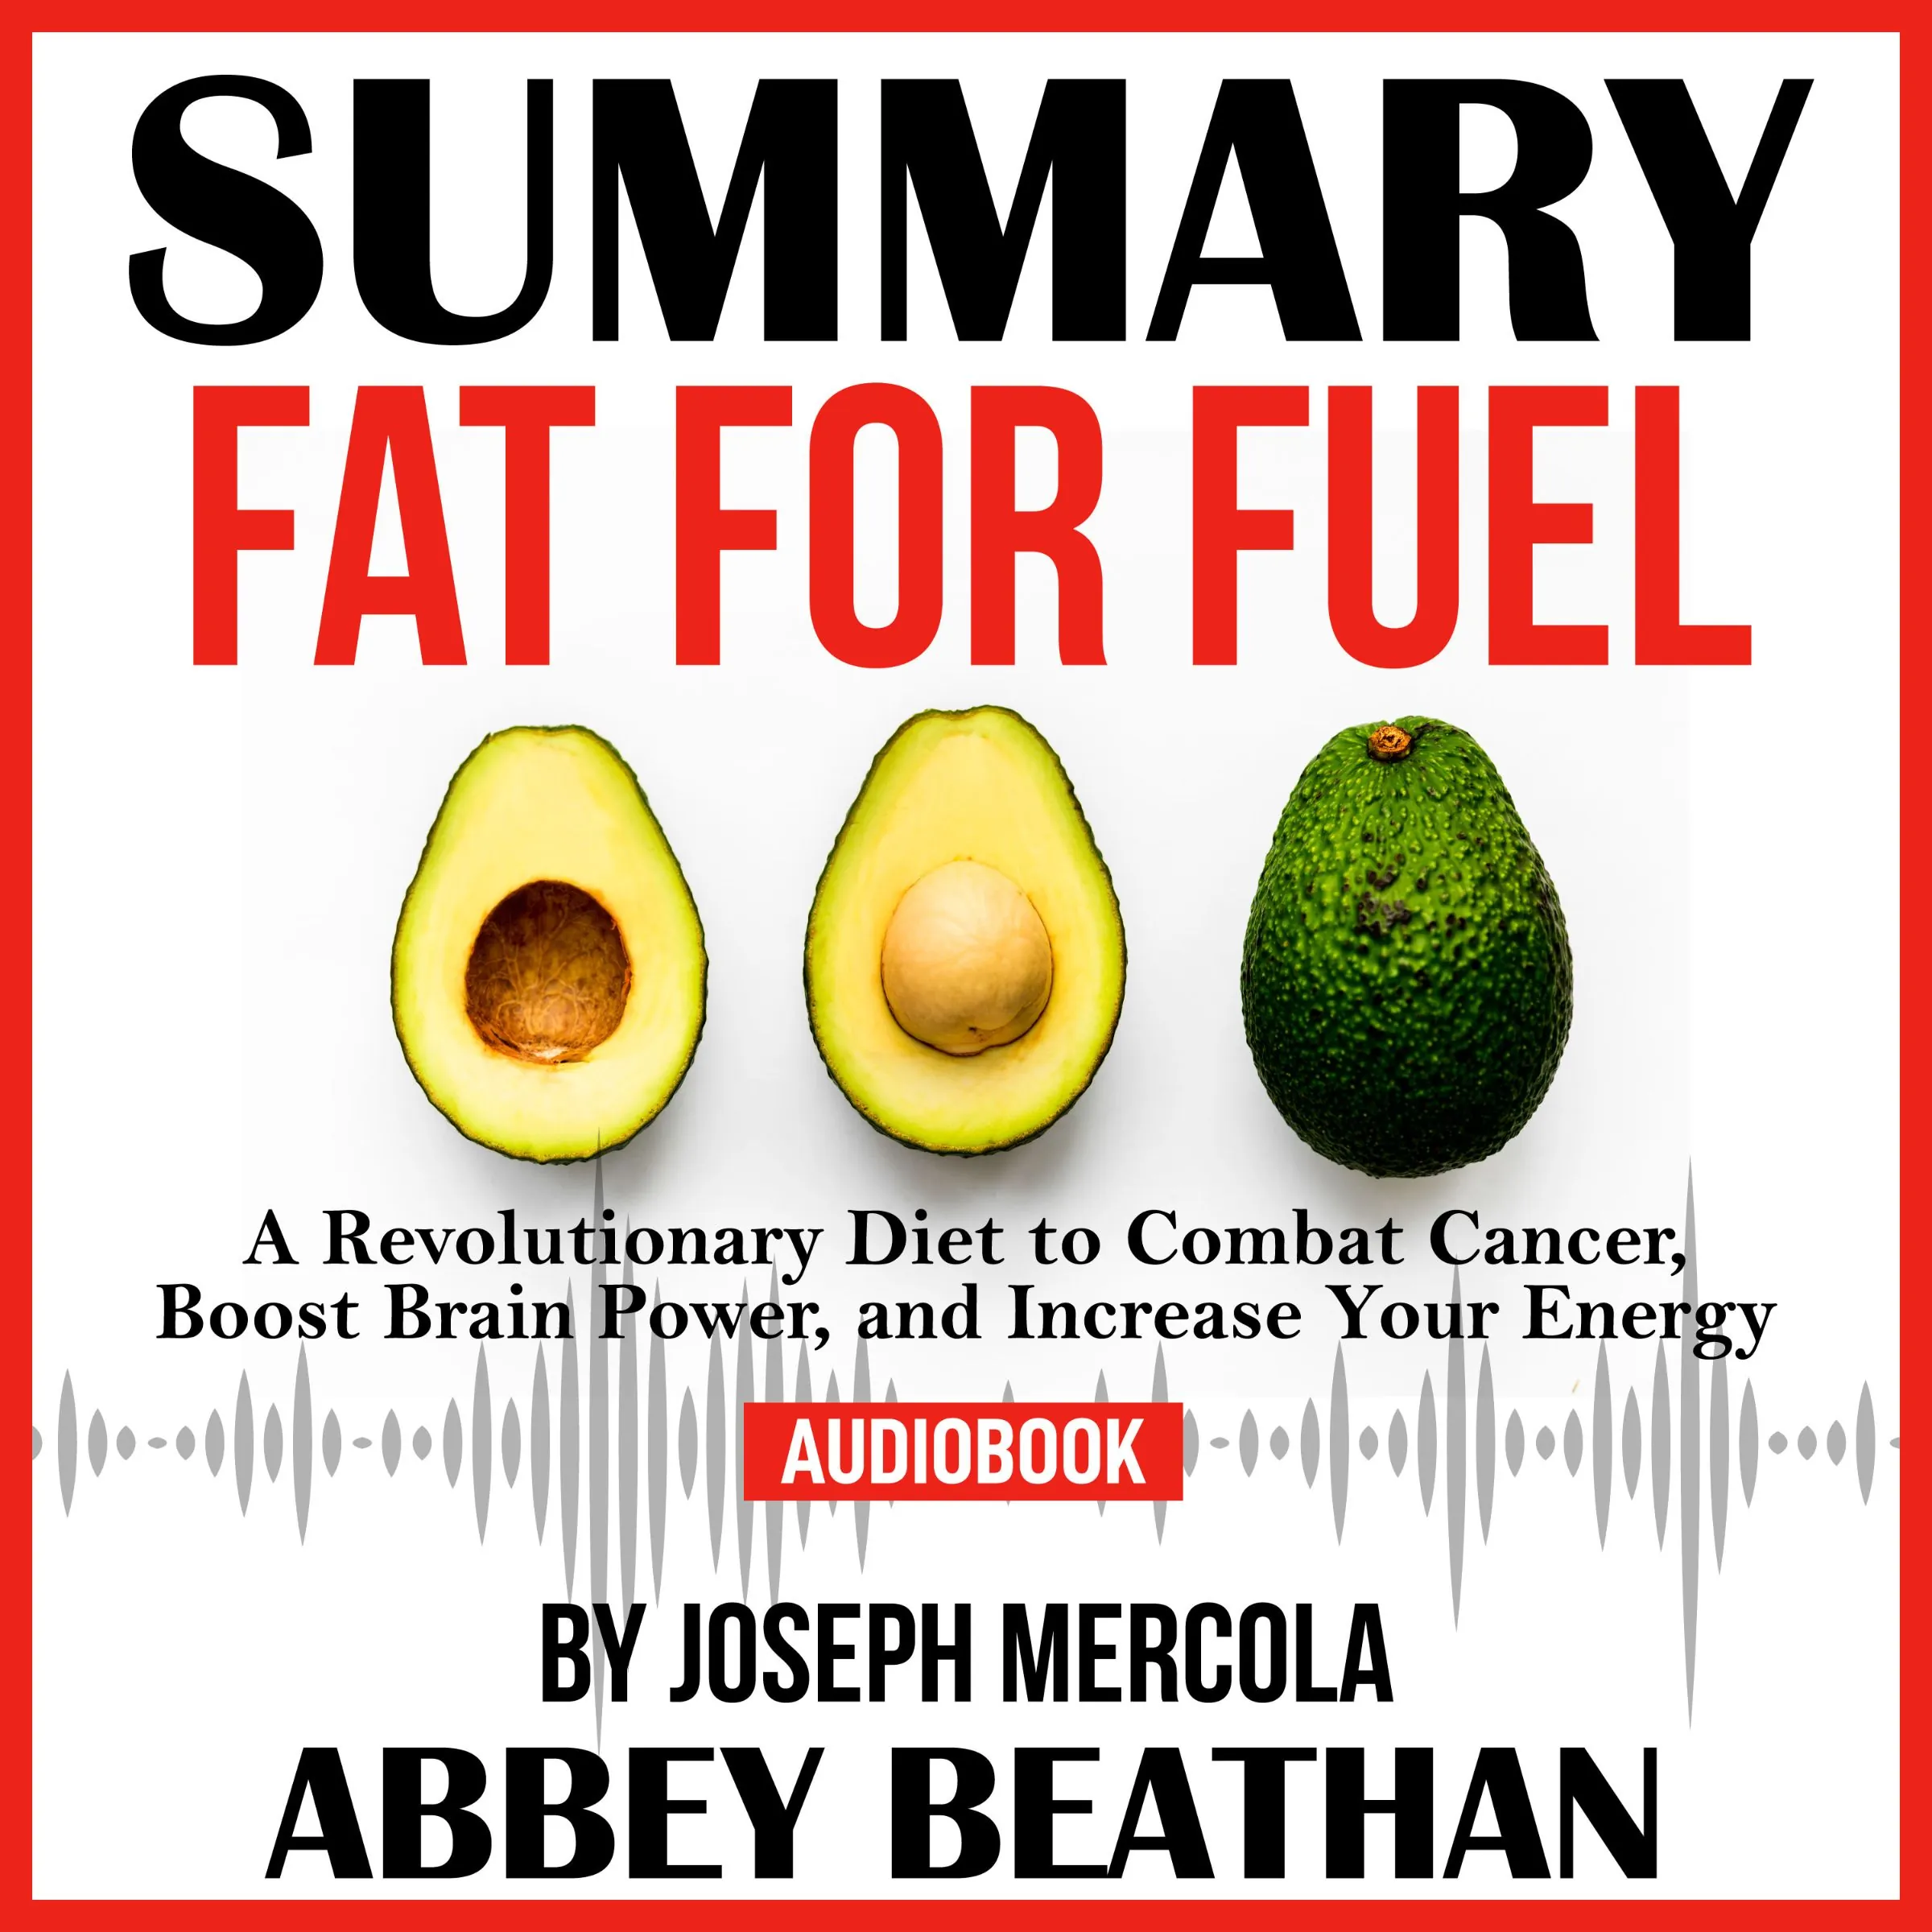 Summary of Fat for Fuel: A Revolutionary Diet to Combat Cancer, Boost Brain Power, and Increase Your Energy by Joseph Mercola Audiobook by Abbey Beathan